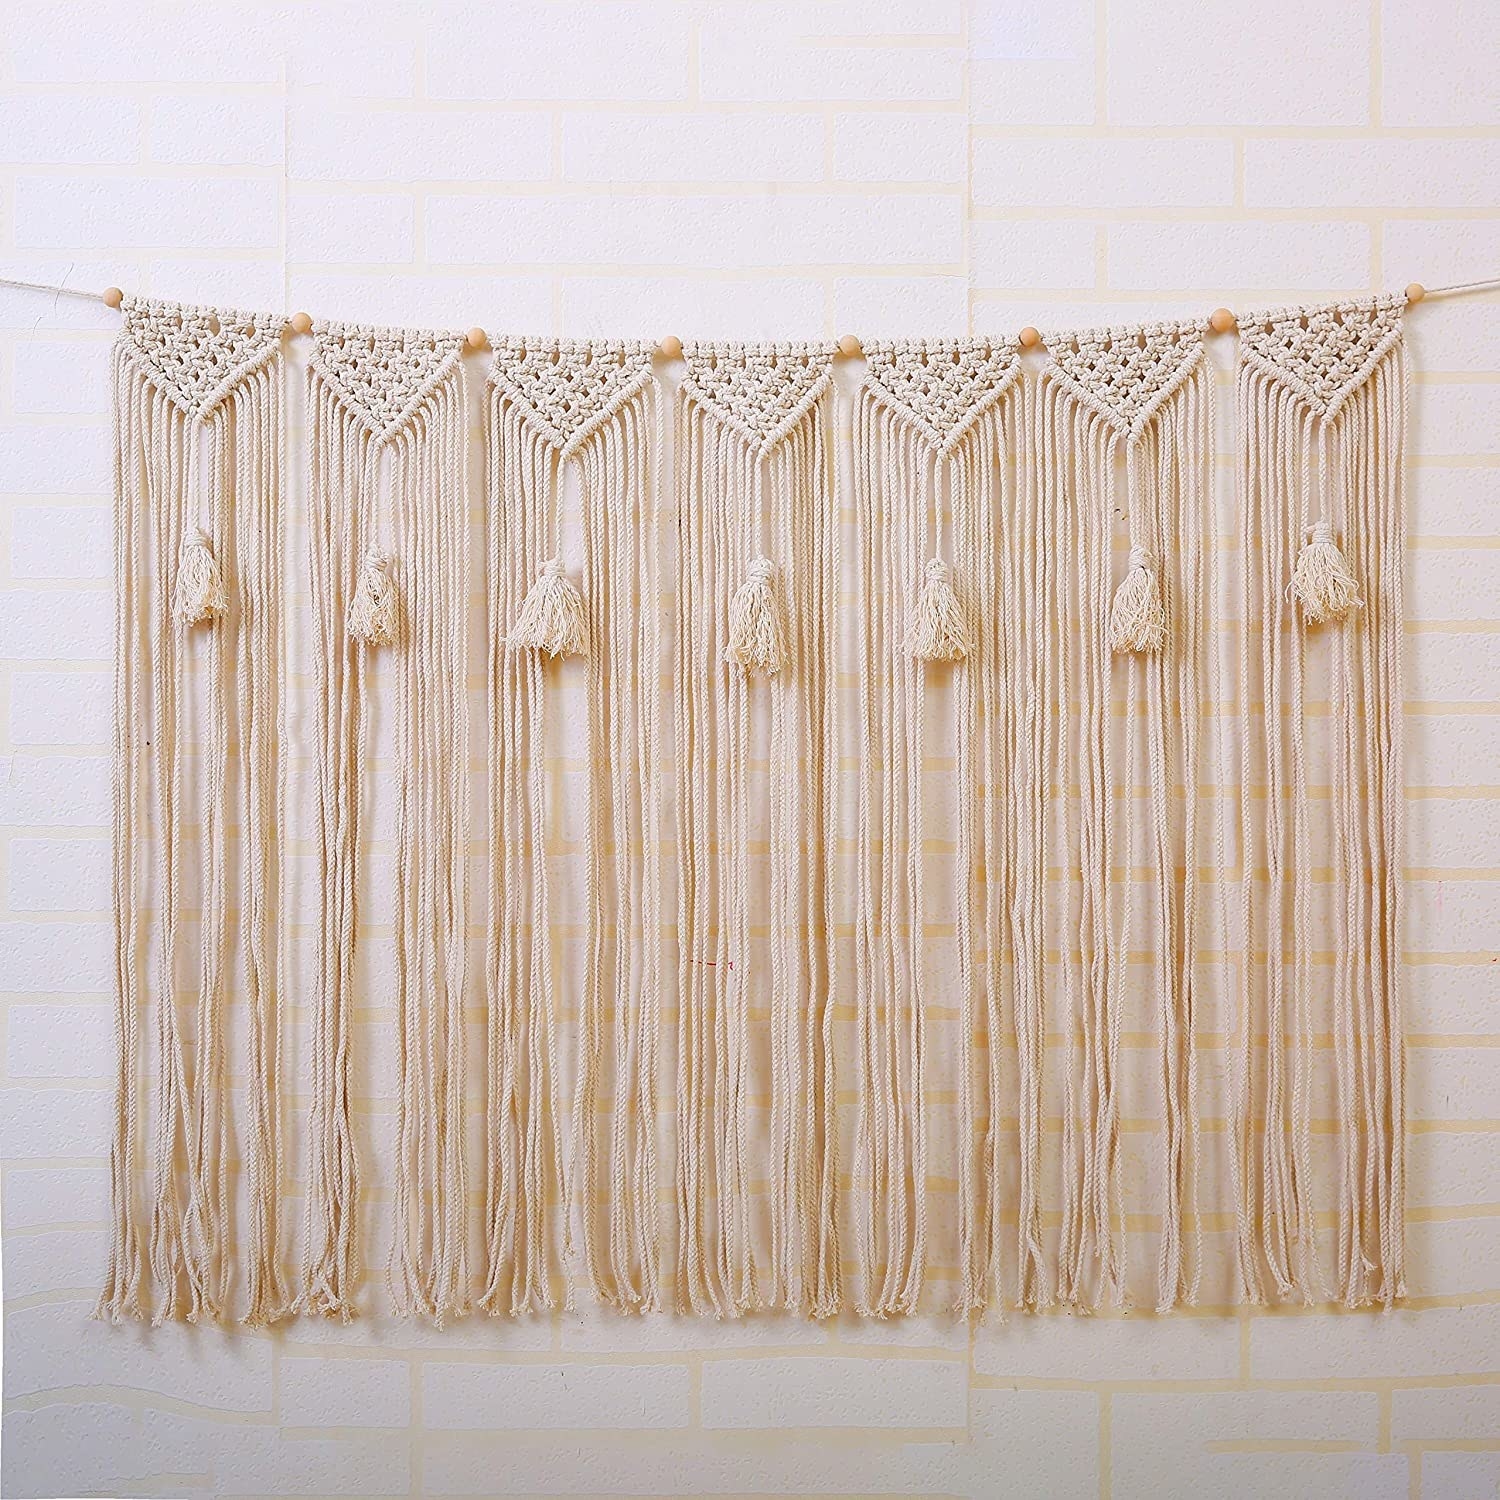 natural rope macrame wall hanging with tassels